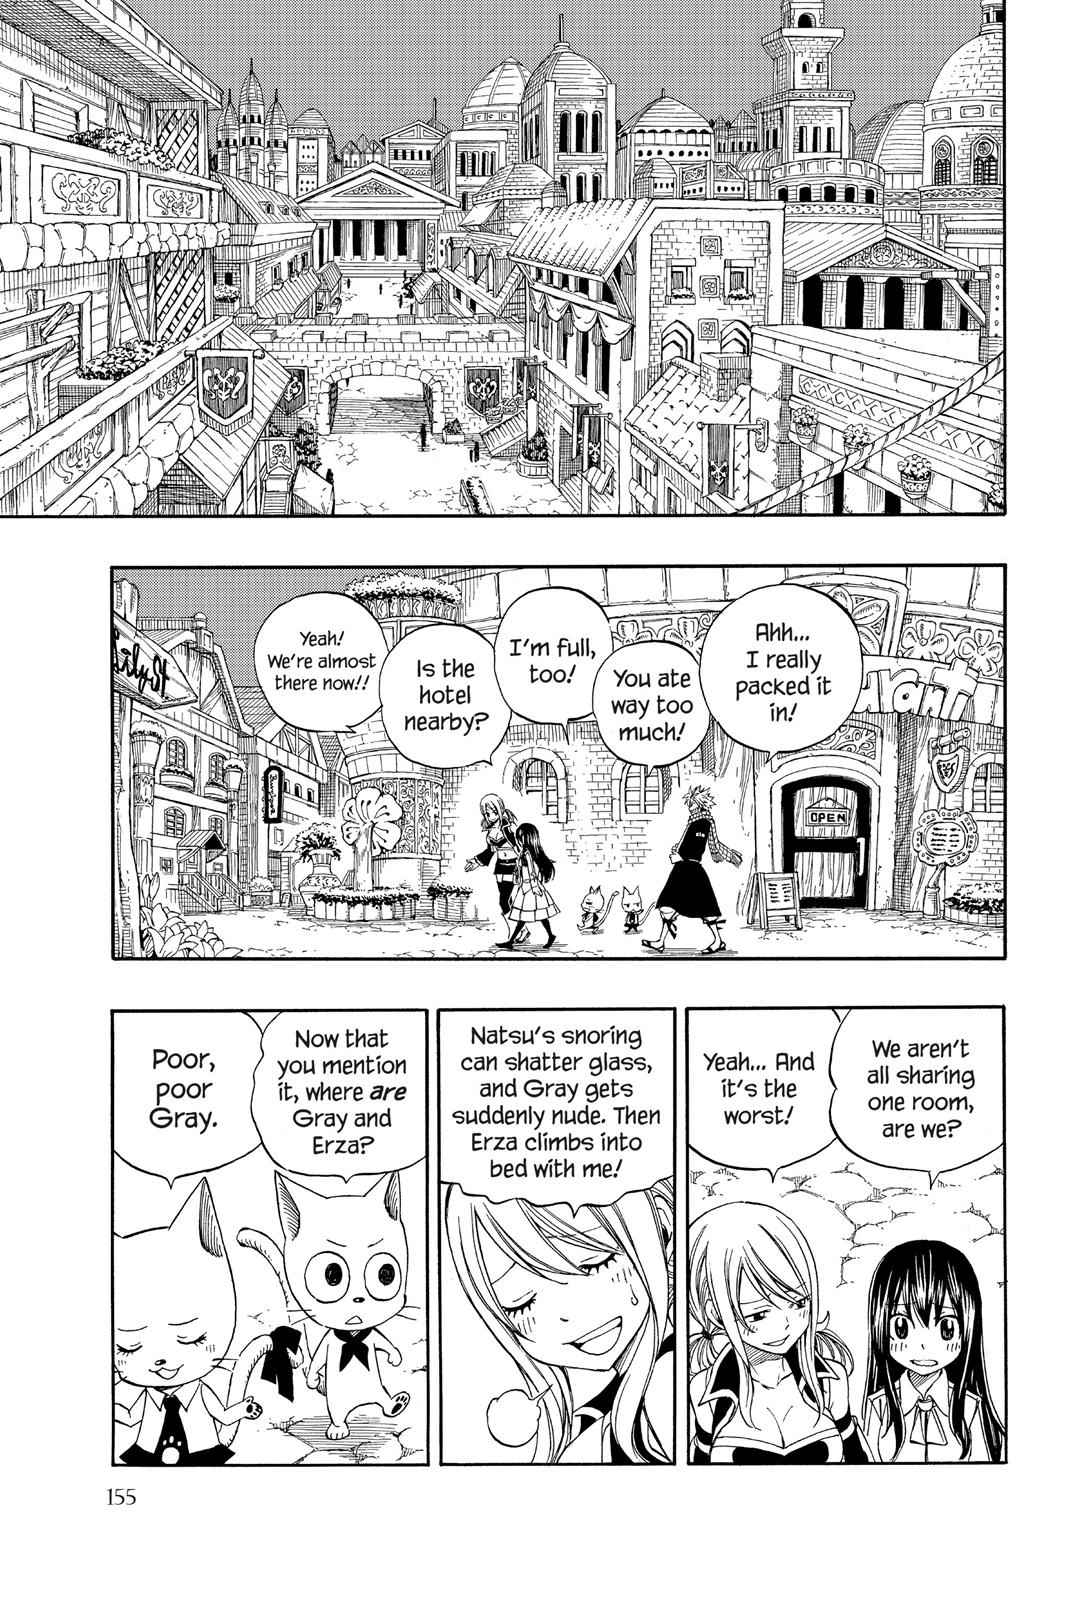  Chapter 281 image 015